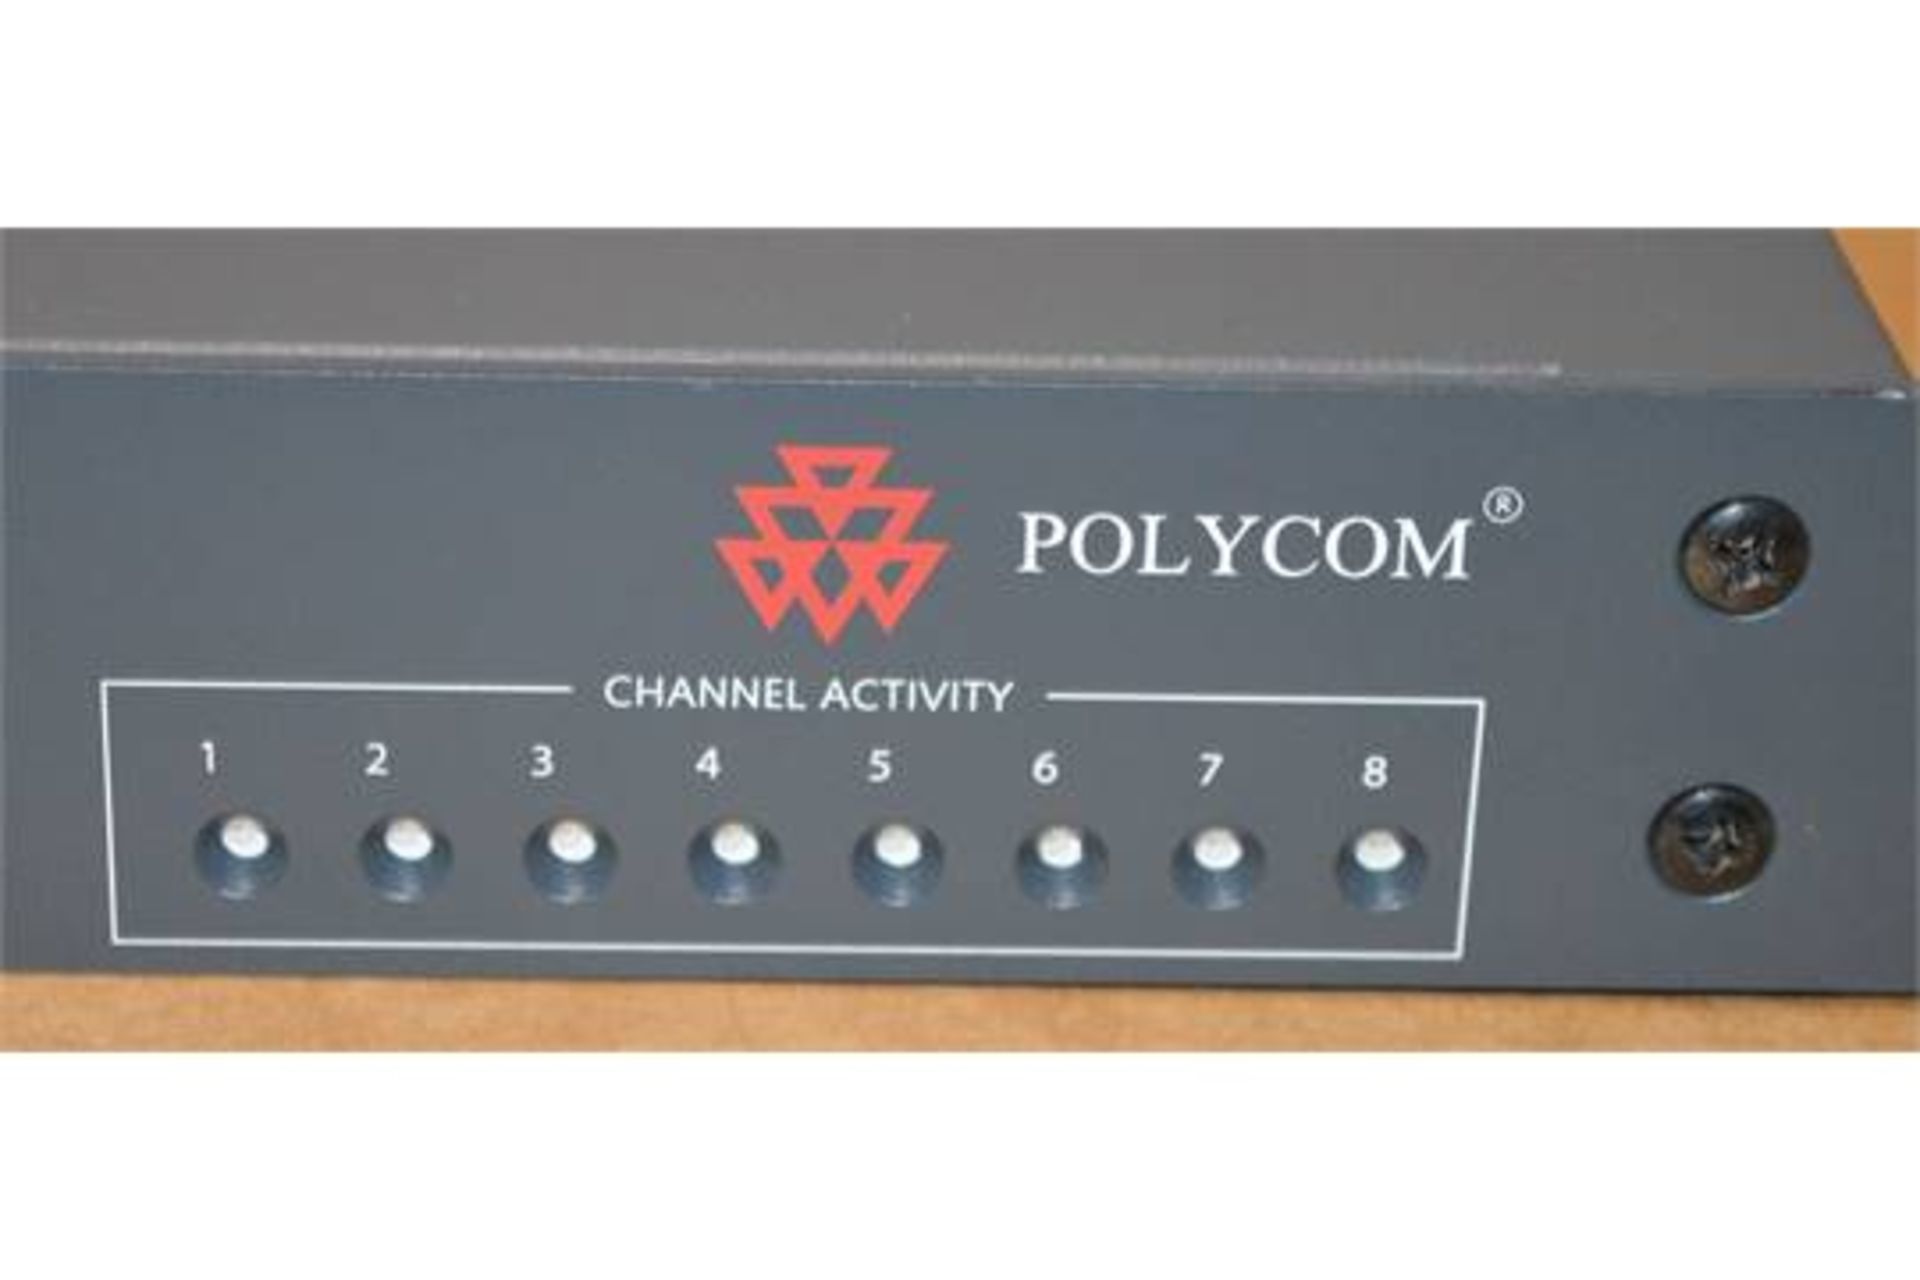 1 x Polycom Vortex Ef2280 Multi-channel Audio Matrix Mixer - With Power Supply - Acoustic Echo/Noise - Image 3 of 3